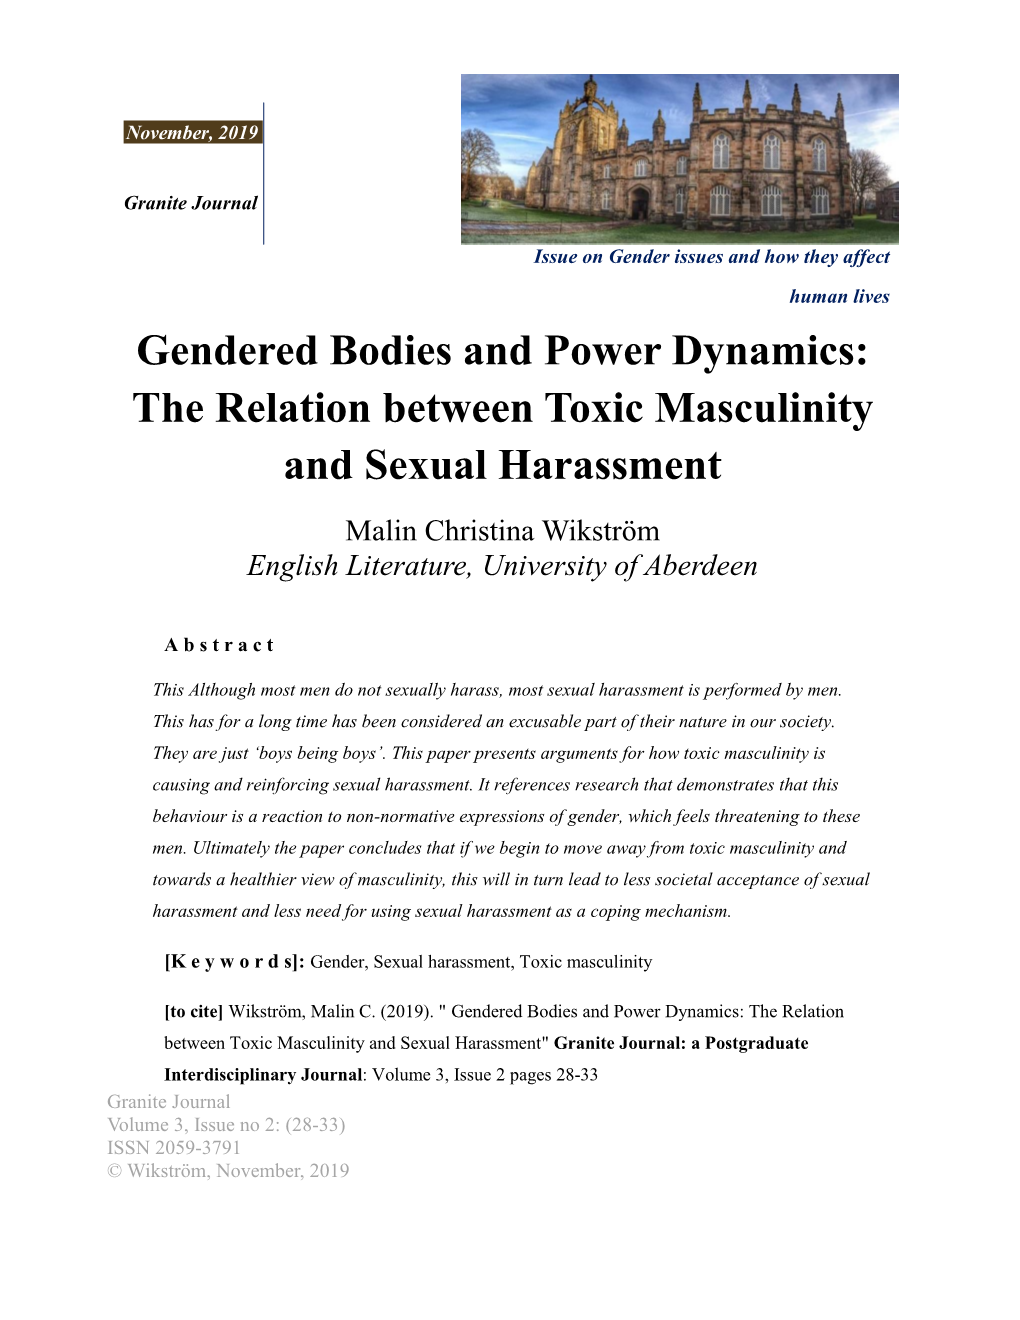 The Relation Between Toxic Masculinity and Sexual Harassment Malin Christina Wikström English Literature, University of Aberdeen